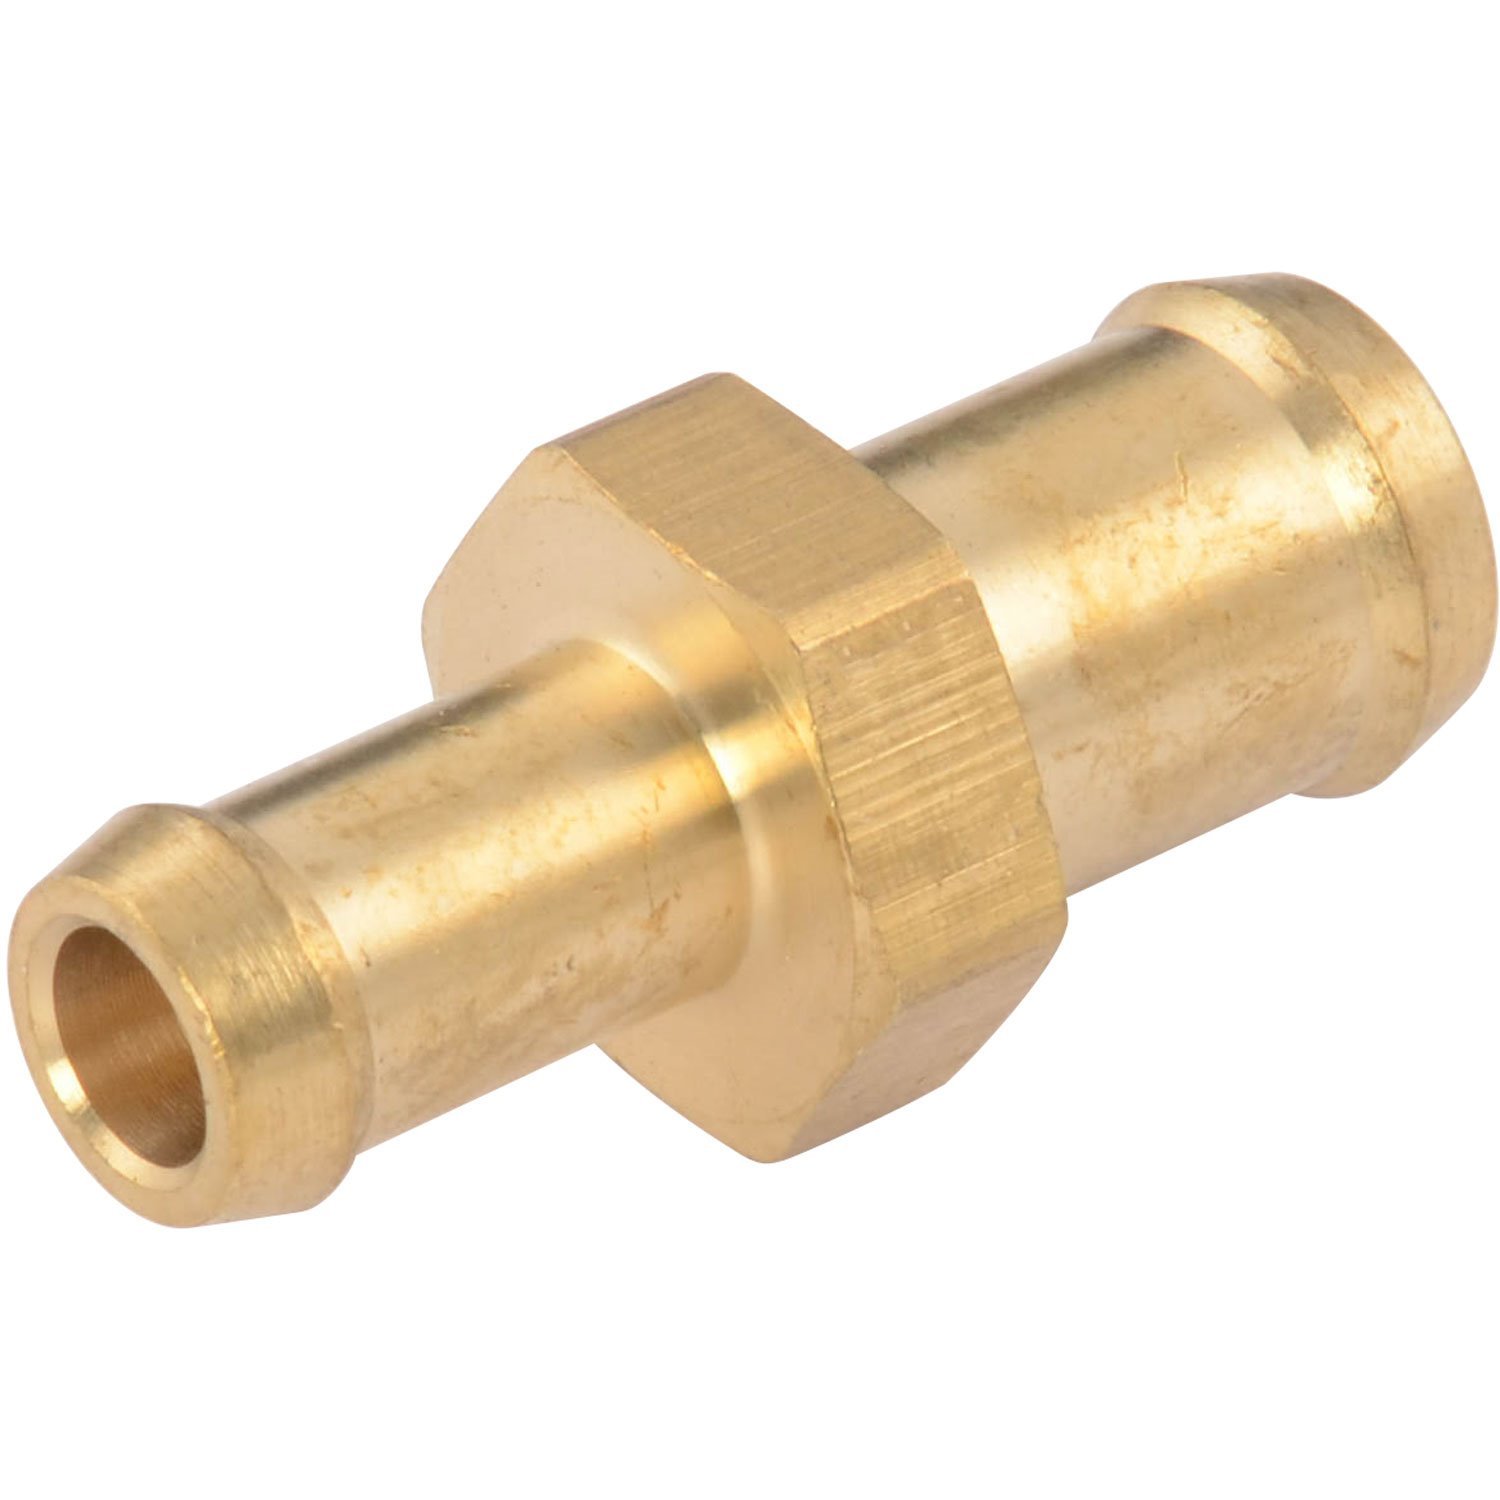 Brass Hose Adapter for 1/2 in. to 3/8